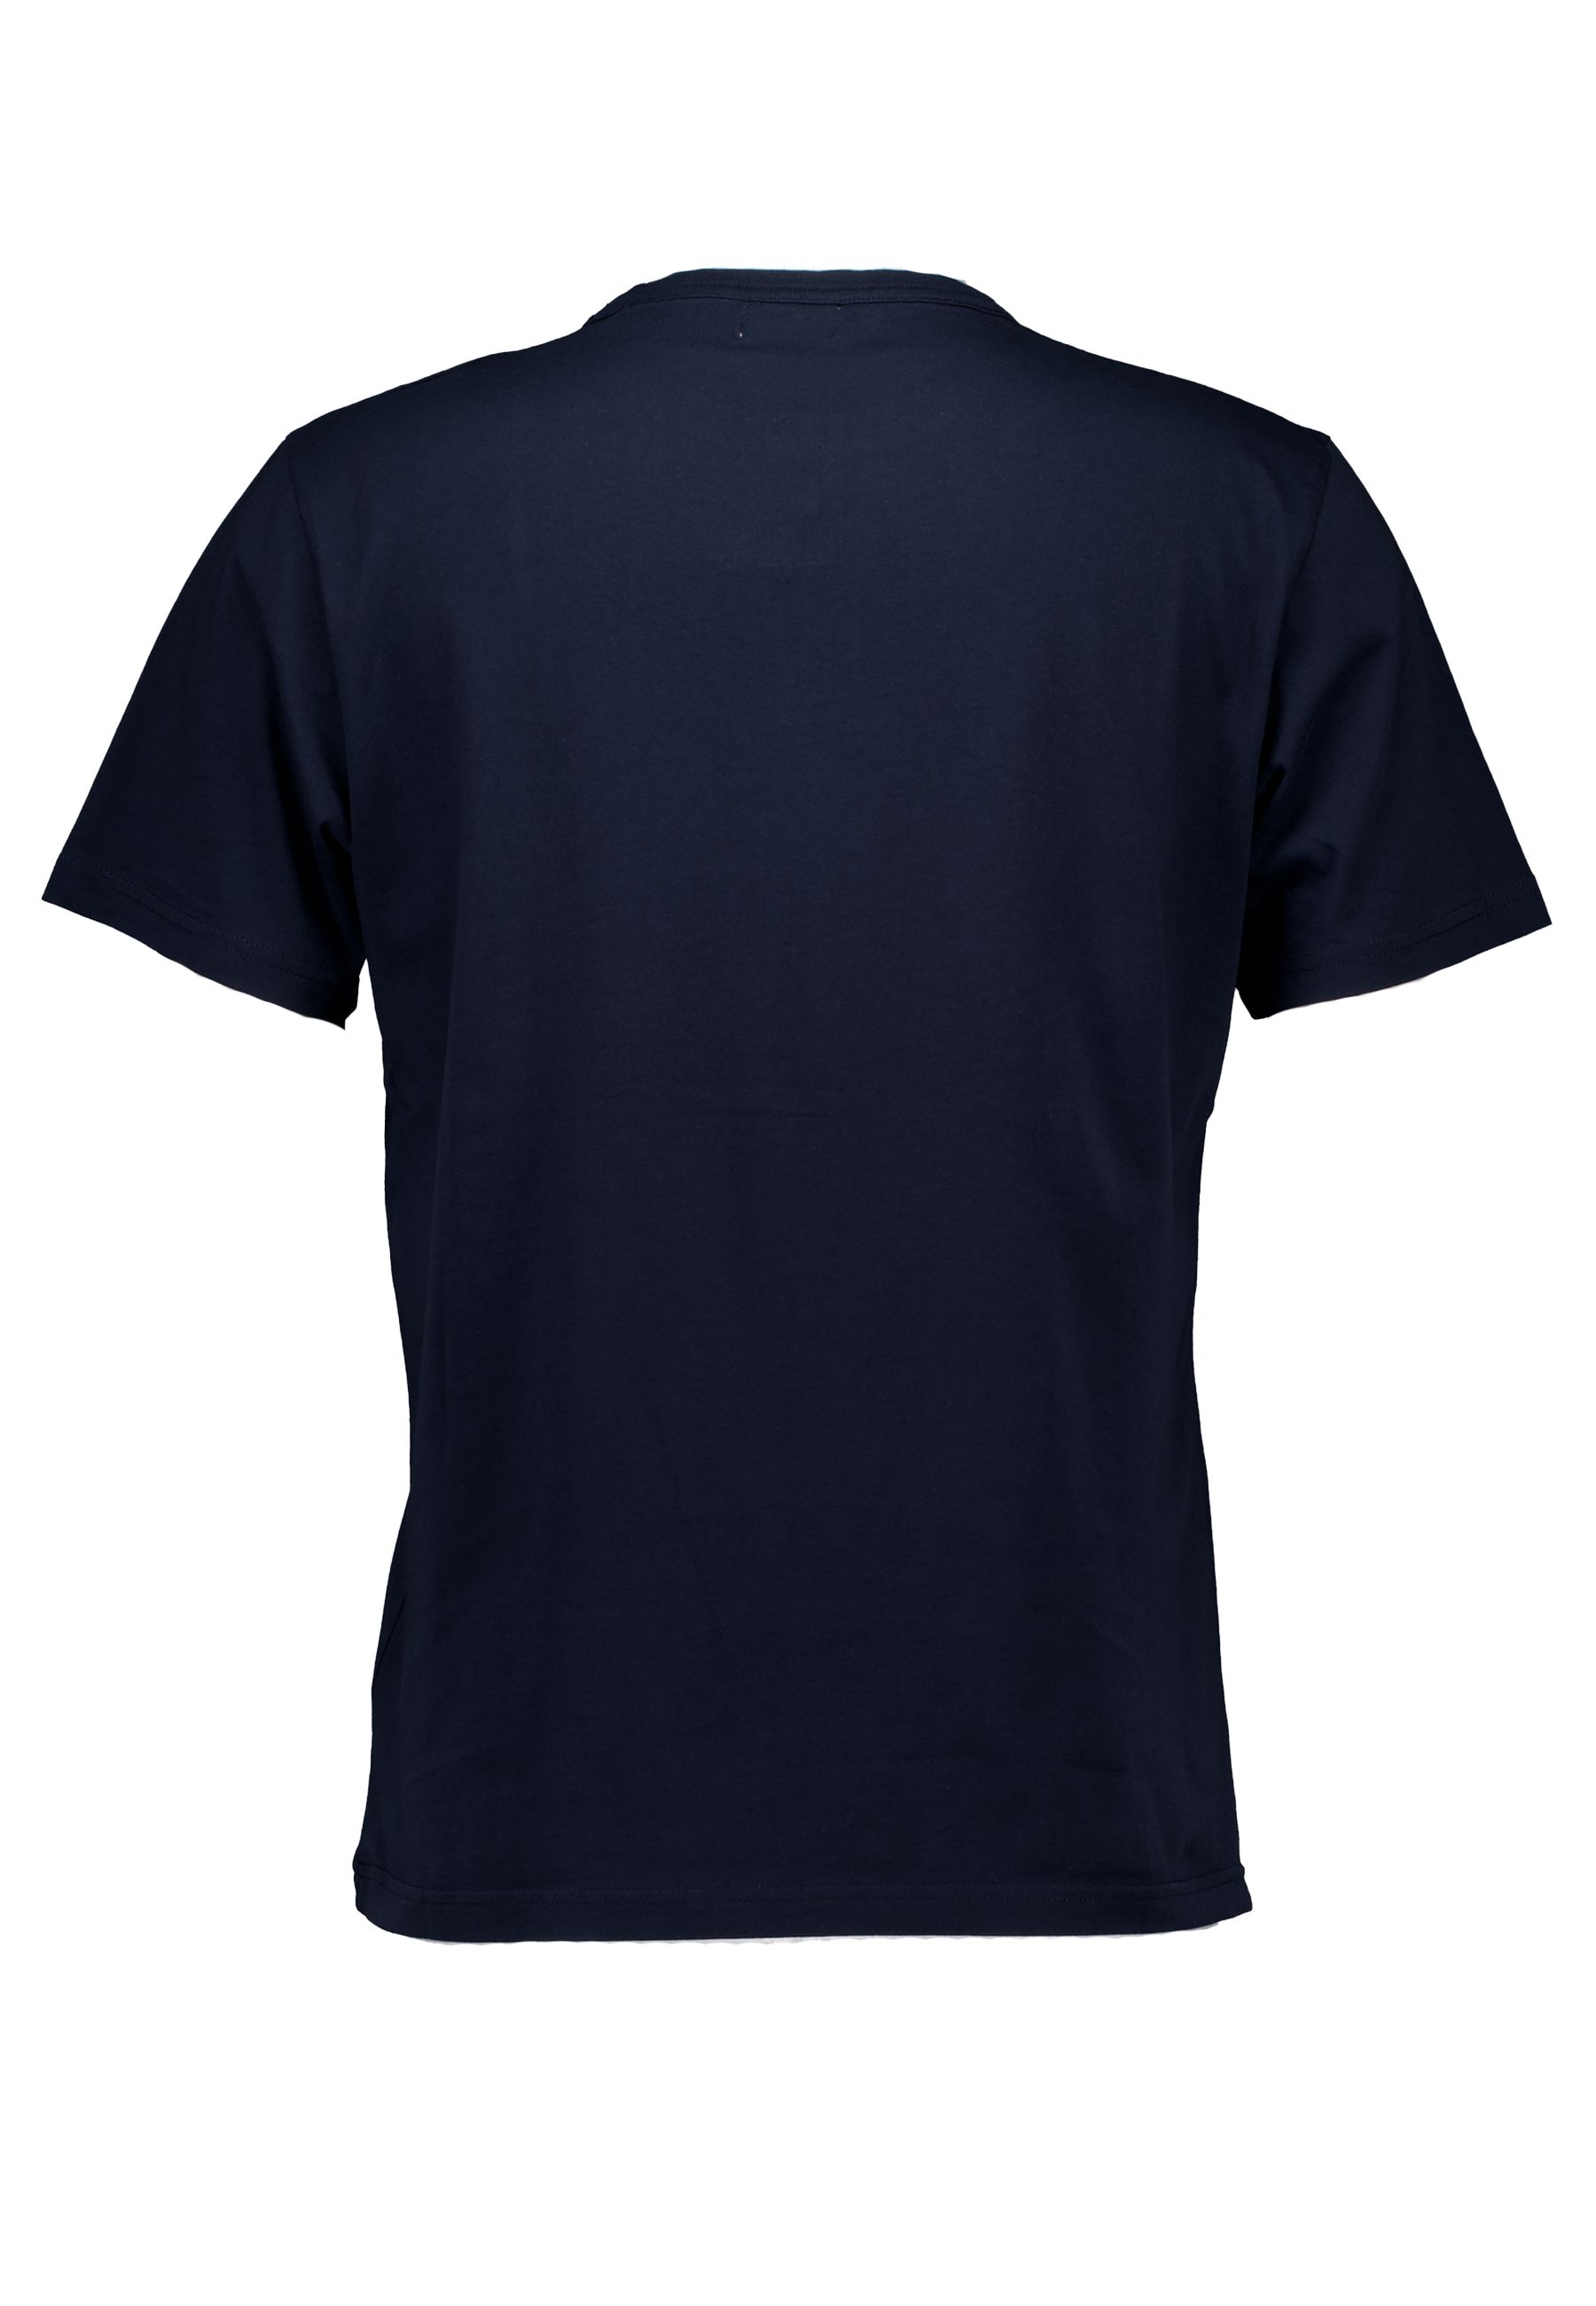 Embroidered logo t-shirts donkerblauw